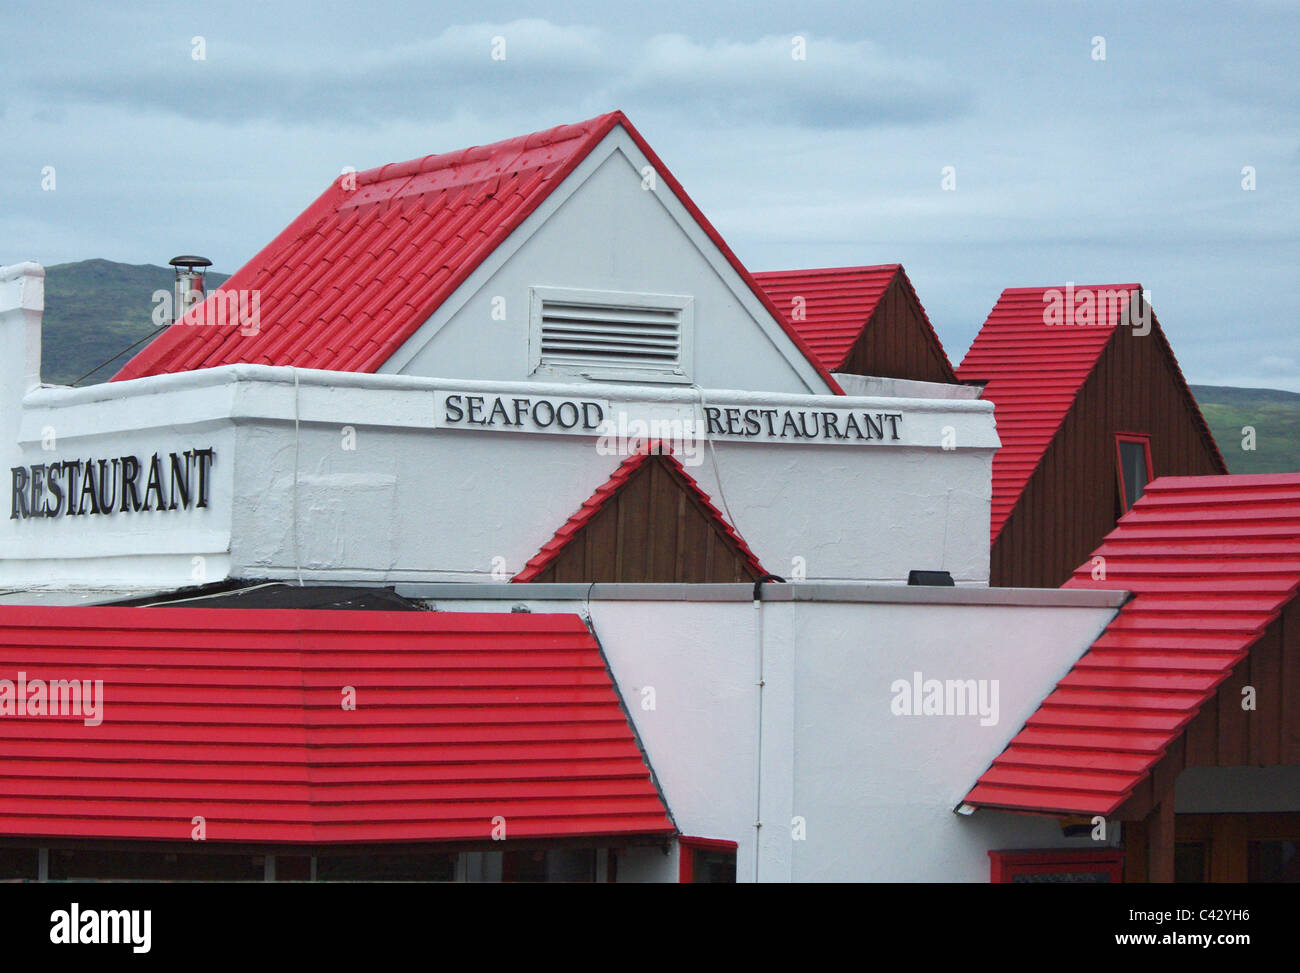 Red roofs and white walls of a seafood restaurant in Fort William, Scotland, UK Stock Photo